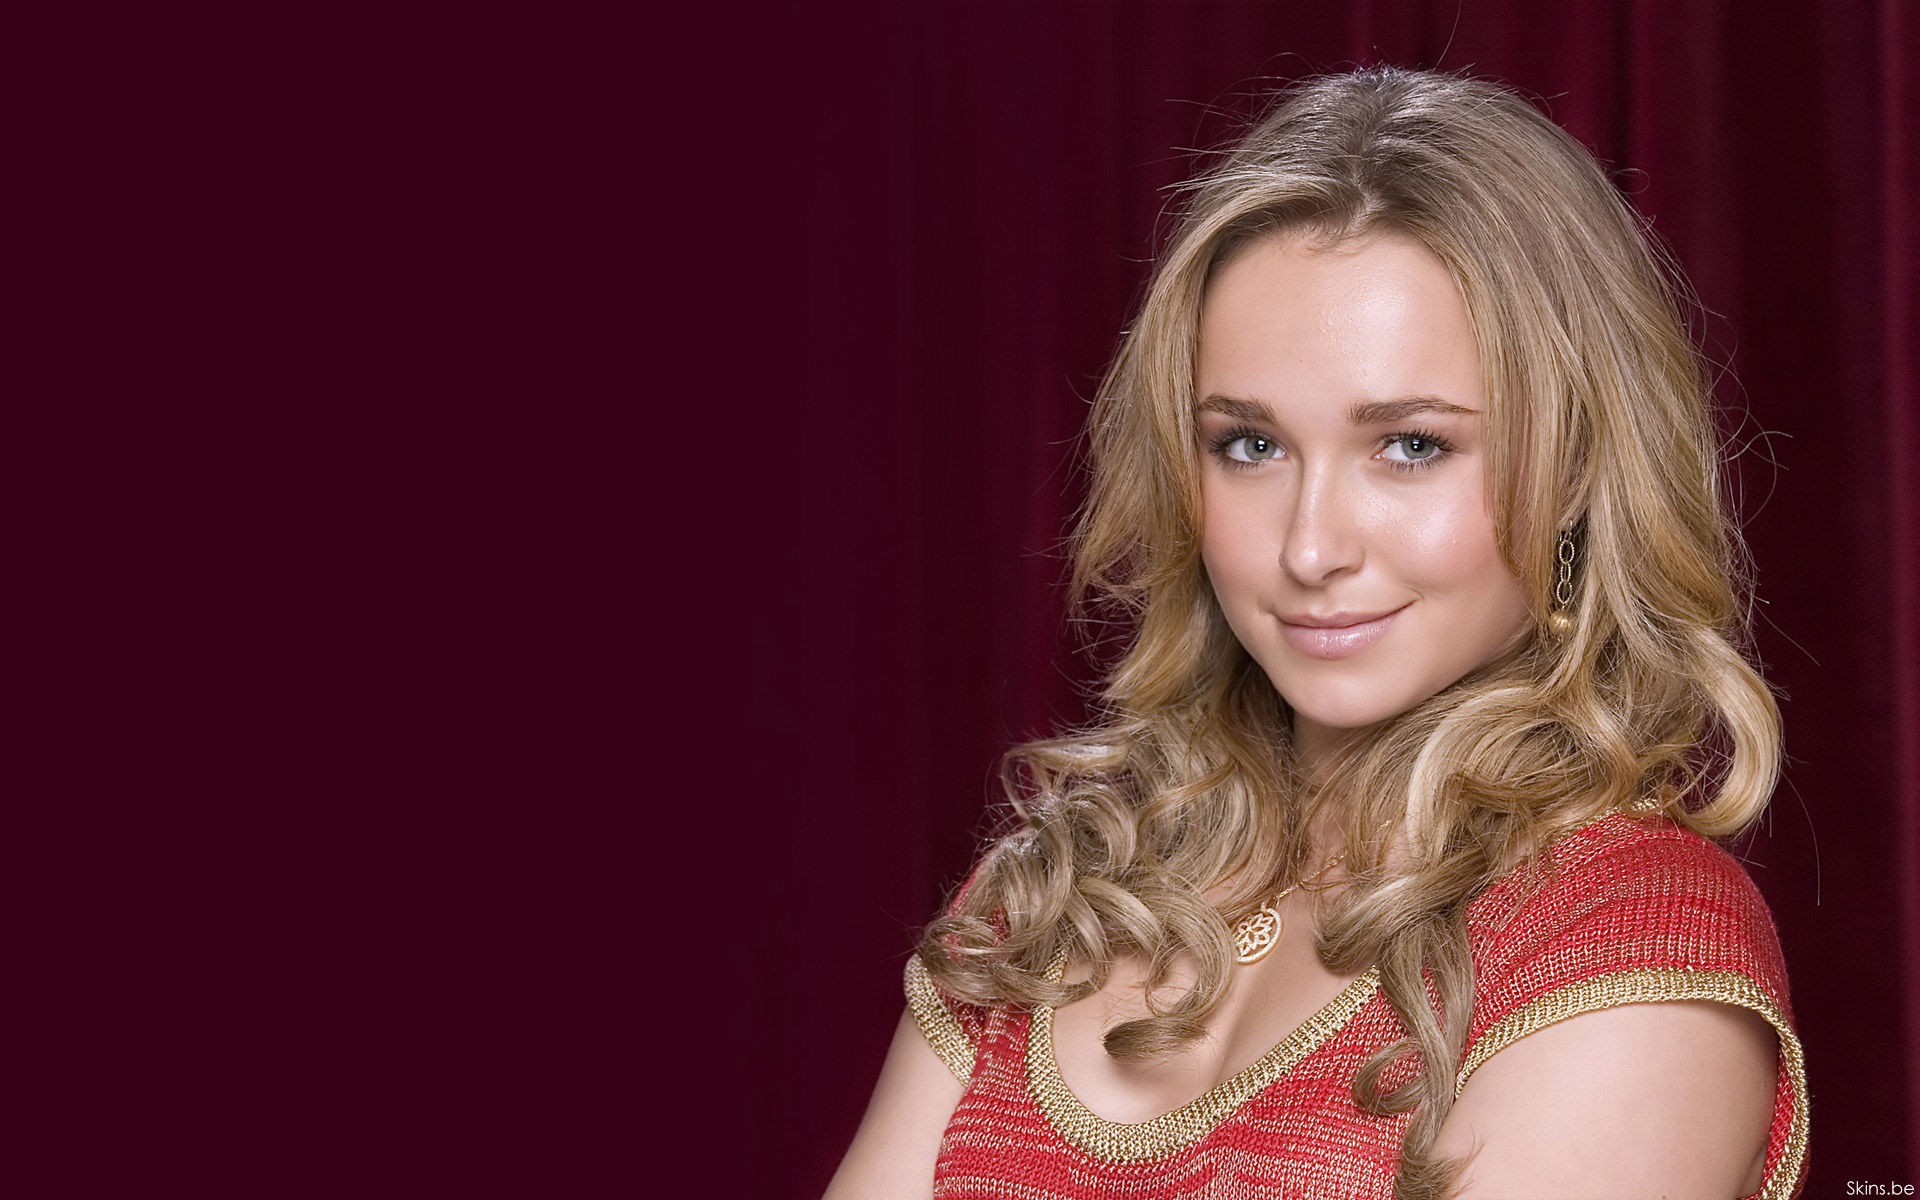 haydenpanettiere pictures hd A22